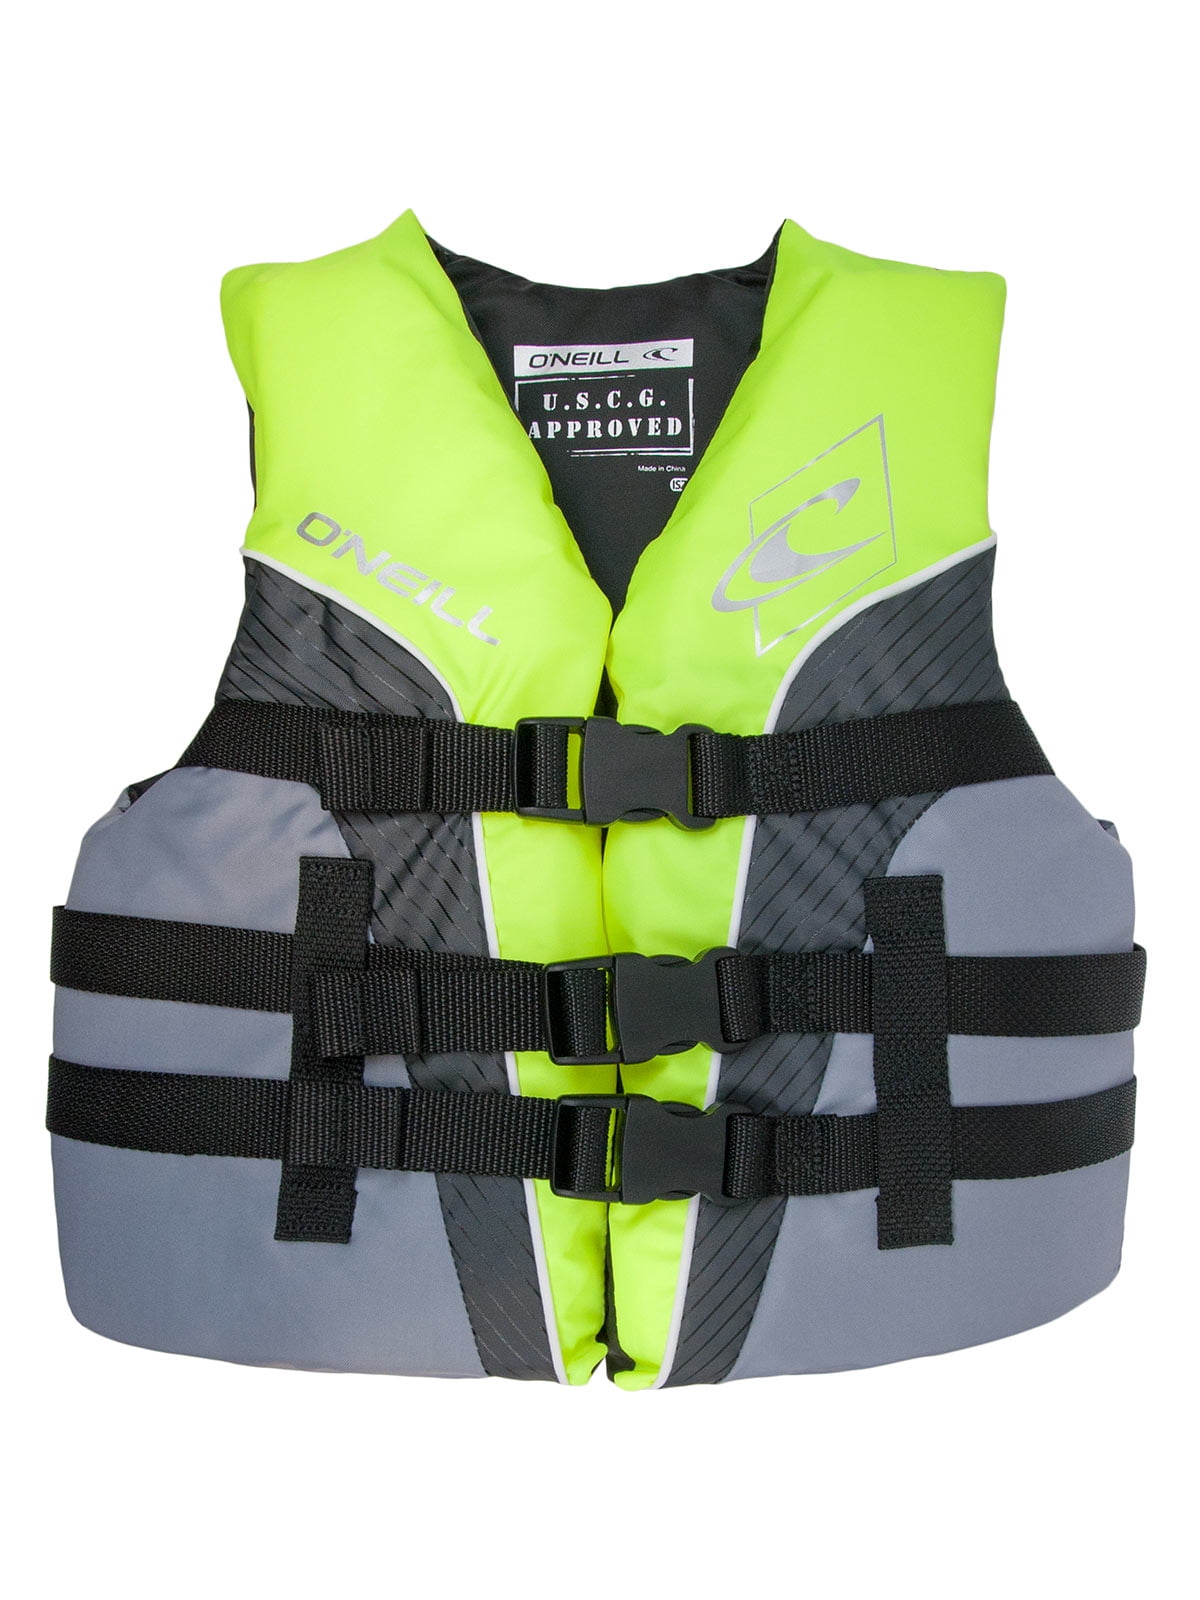 USCG Stearns Life Vest New! Youth Med 50-90 Lbs Chest Size 26"-29" 